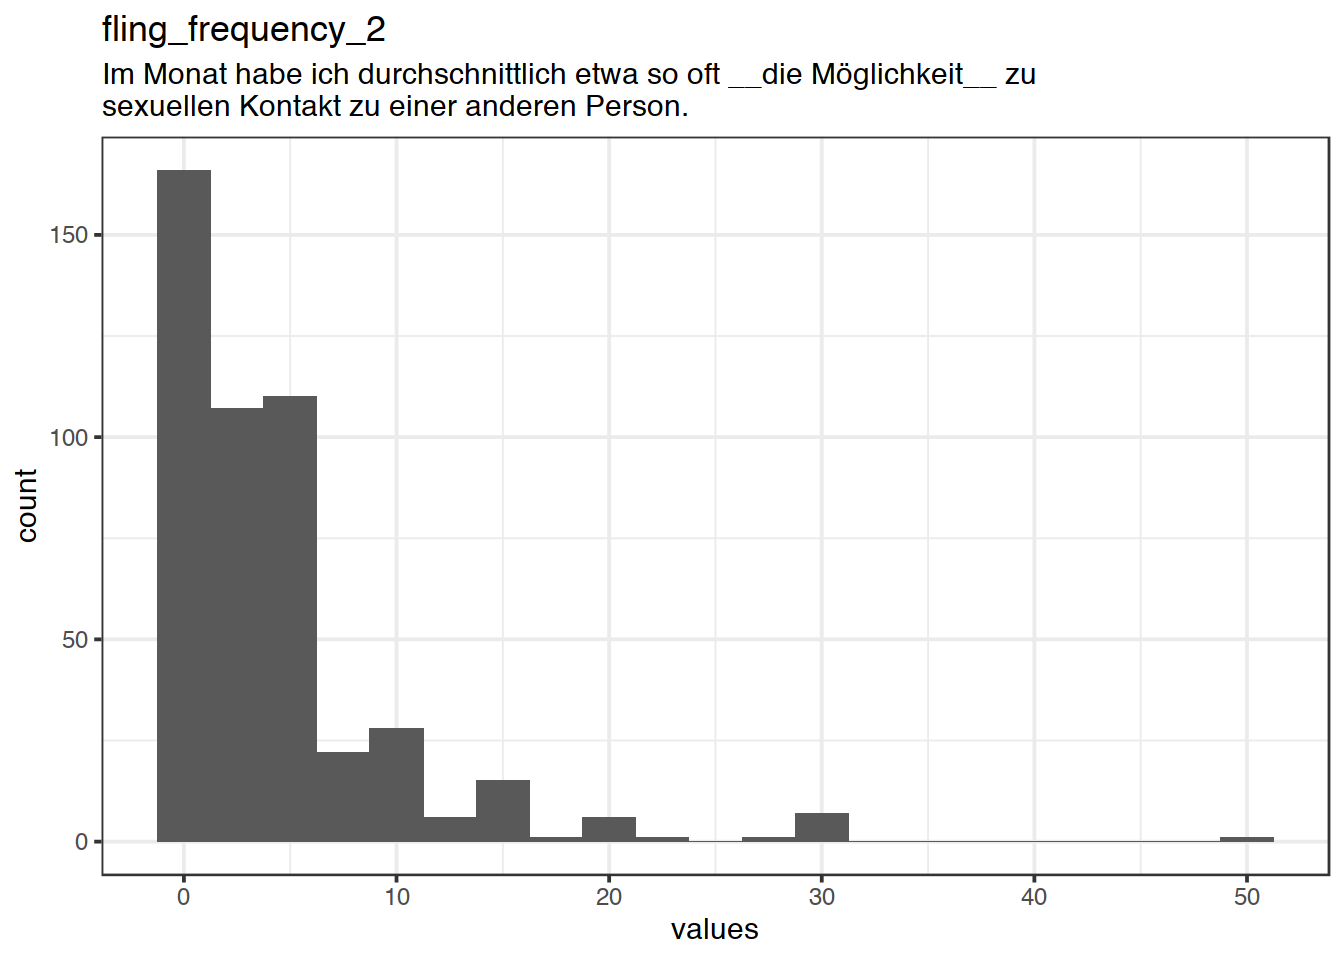 Distribution of values for fling_frequency_2